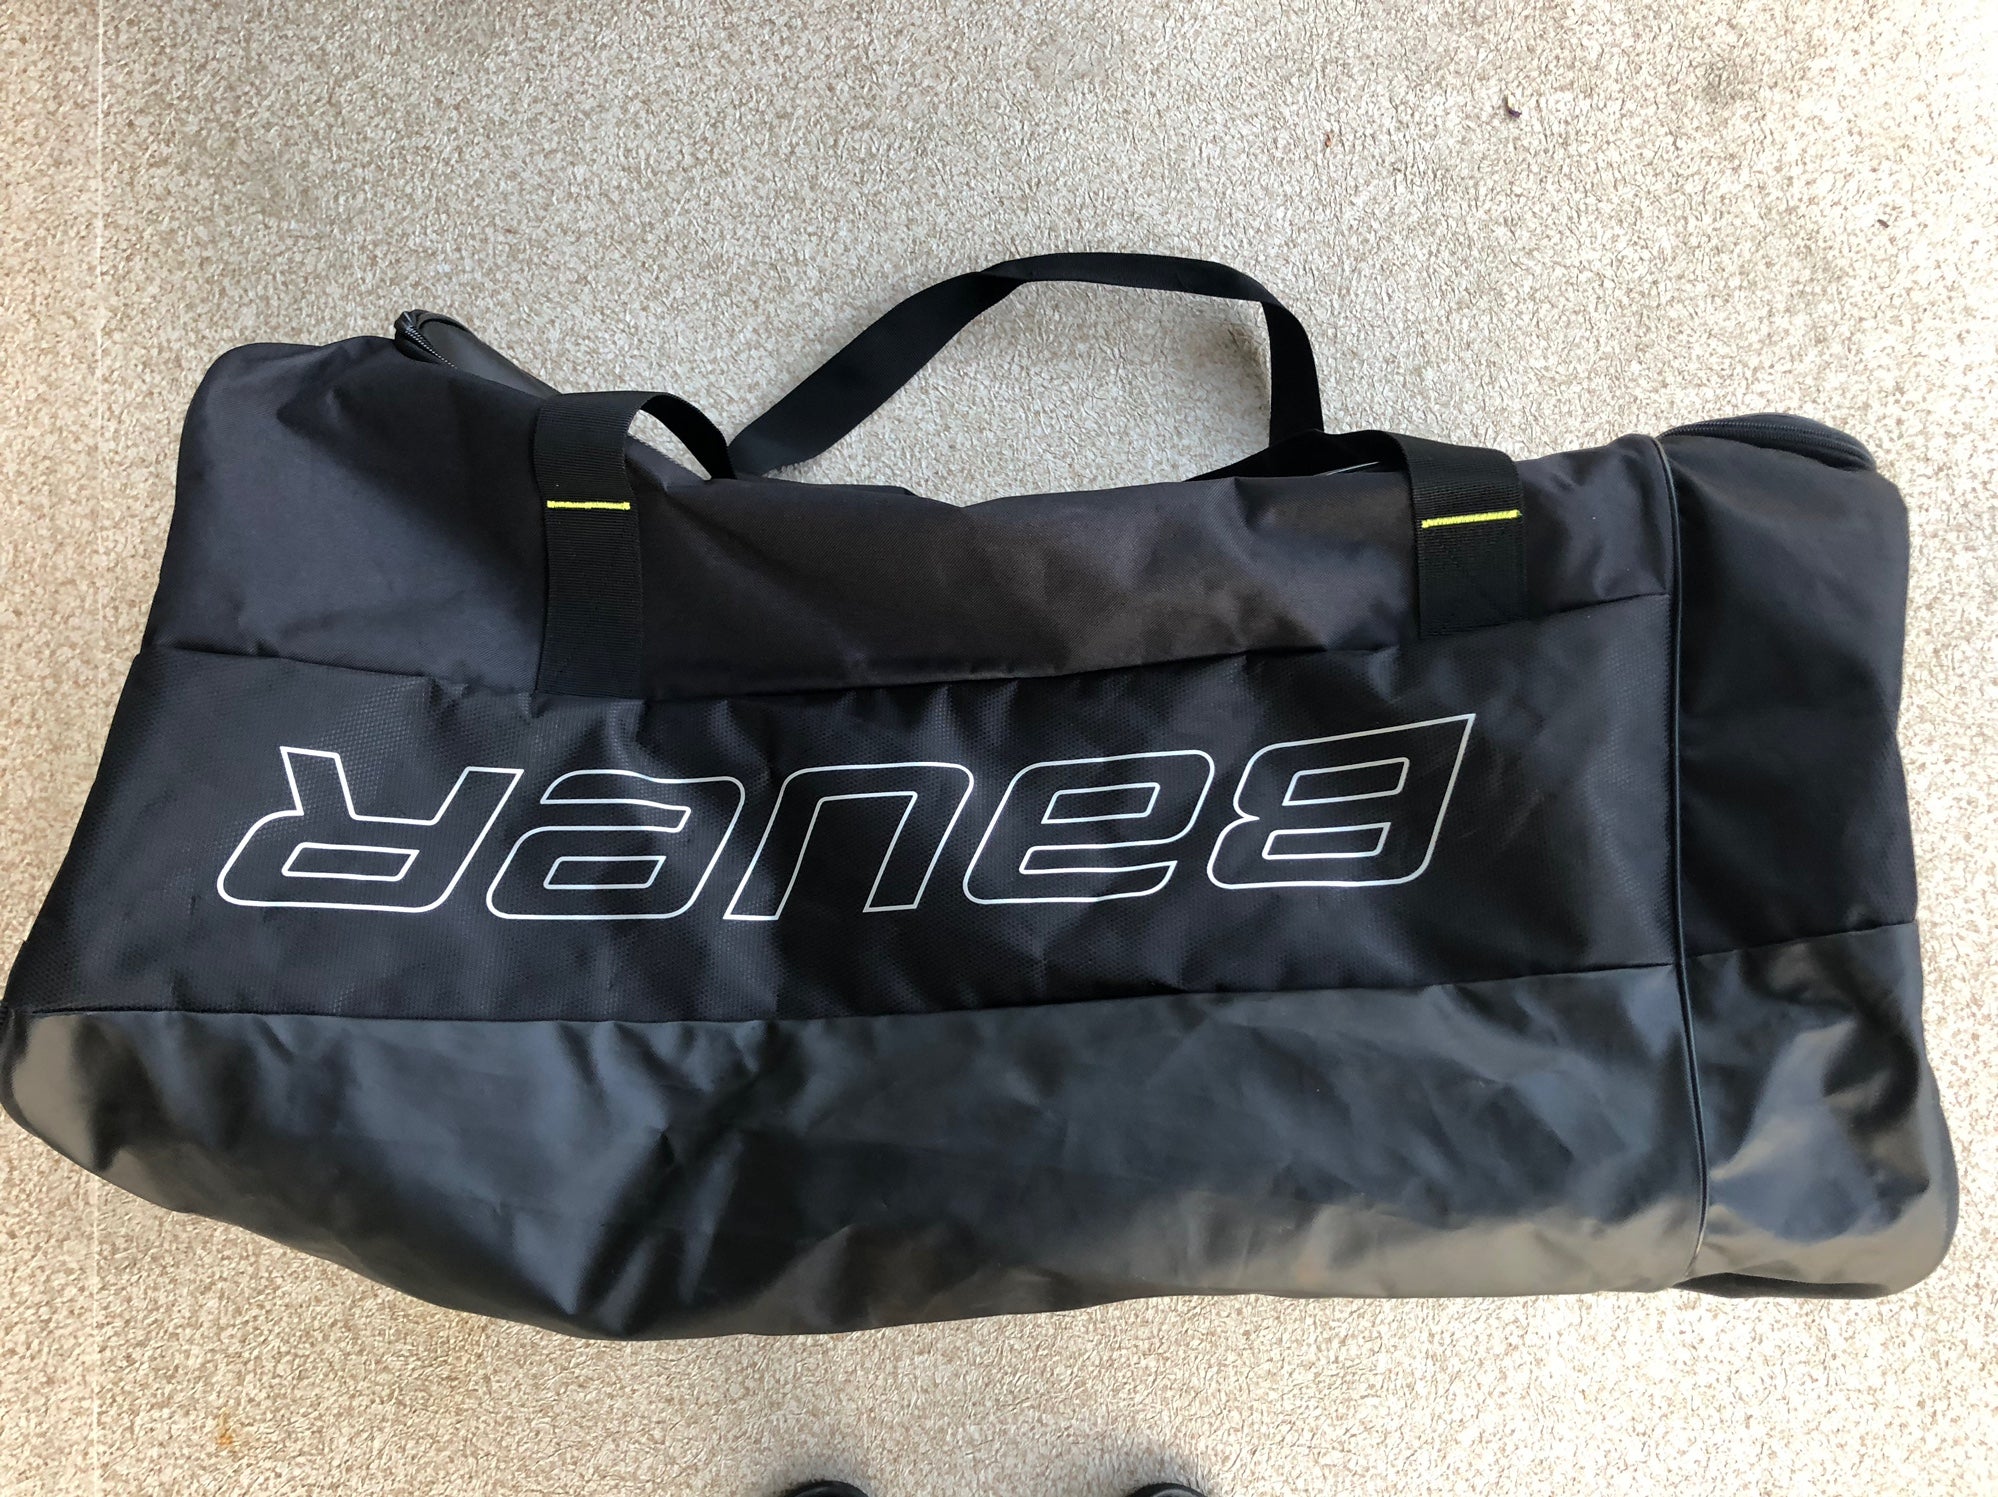 Ice Hockey > Bags > Player Bags > Bauer 850 Carry bag Large